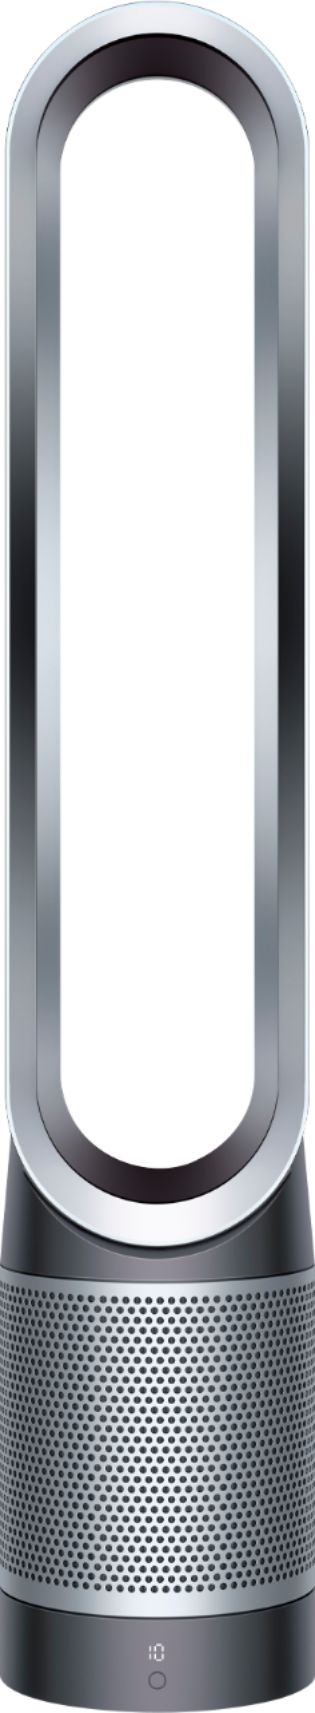 Dyson Pure Cool TP01, Tower Iron / Silver 286822-01 - Best Buy